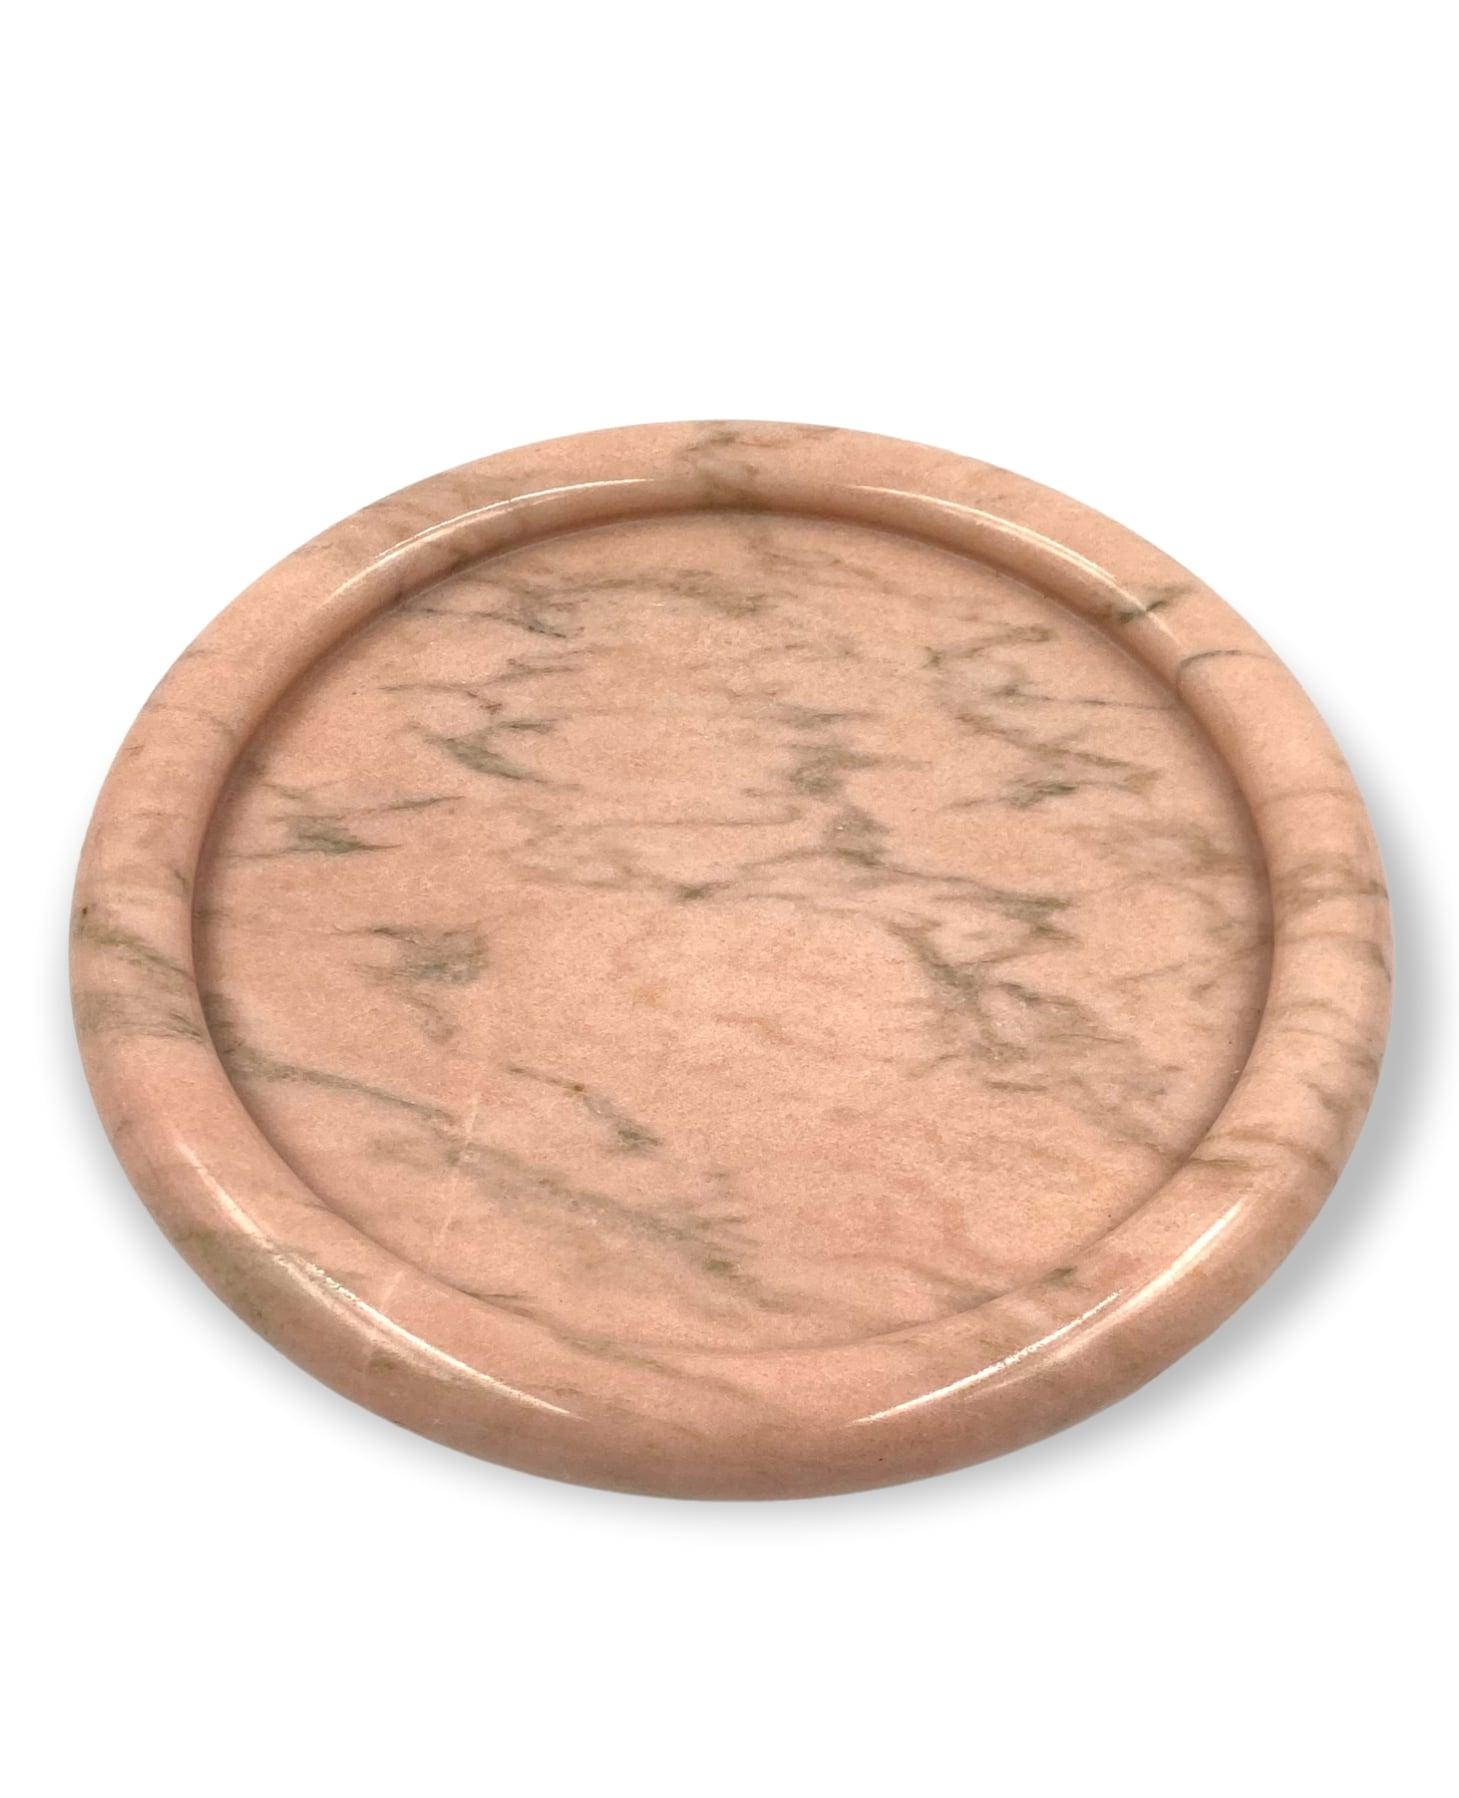 Sergio Asti, Pink Portuguese Marble Centerpiece / Tray, Up&Up Italy, 1970s For Sale 5